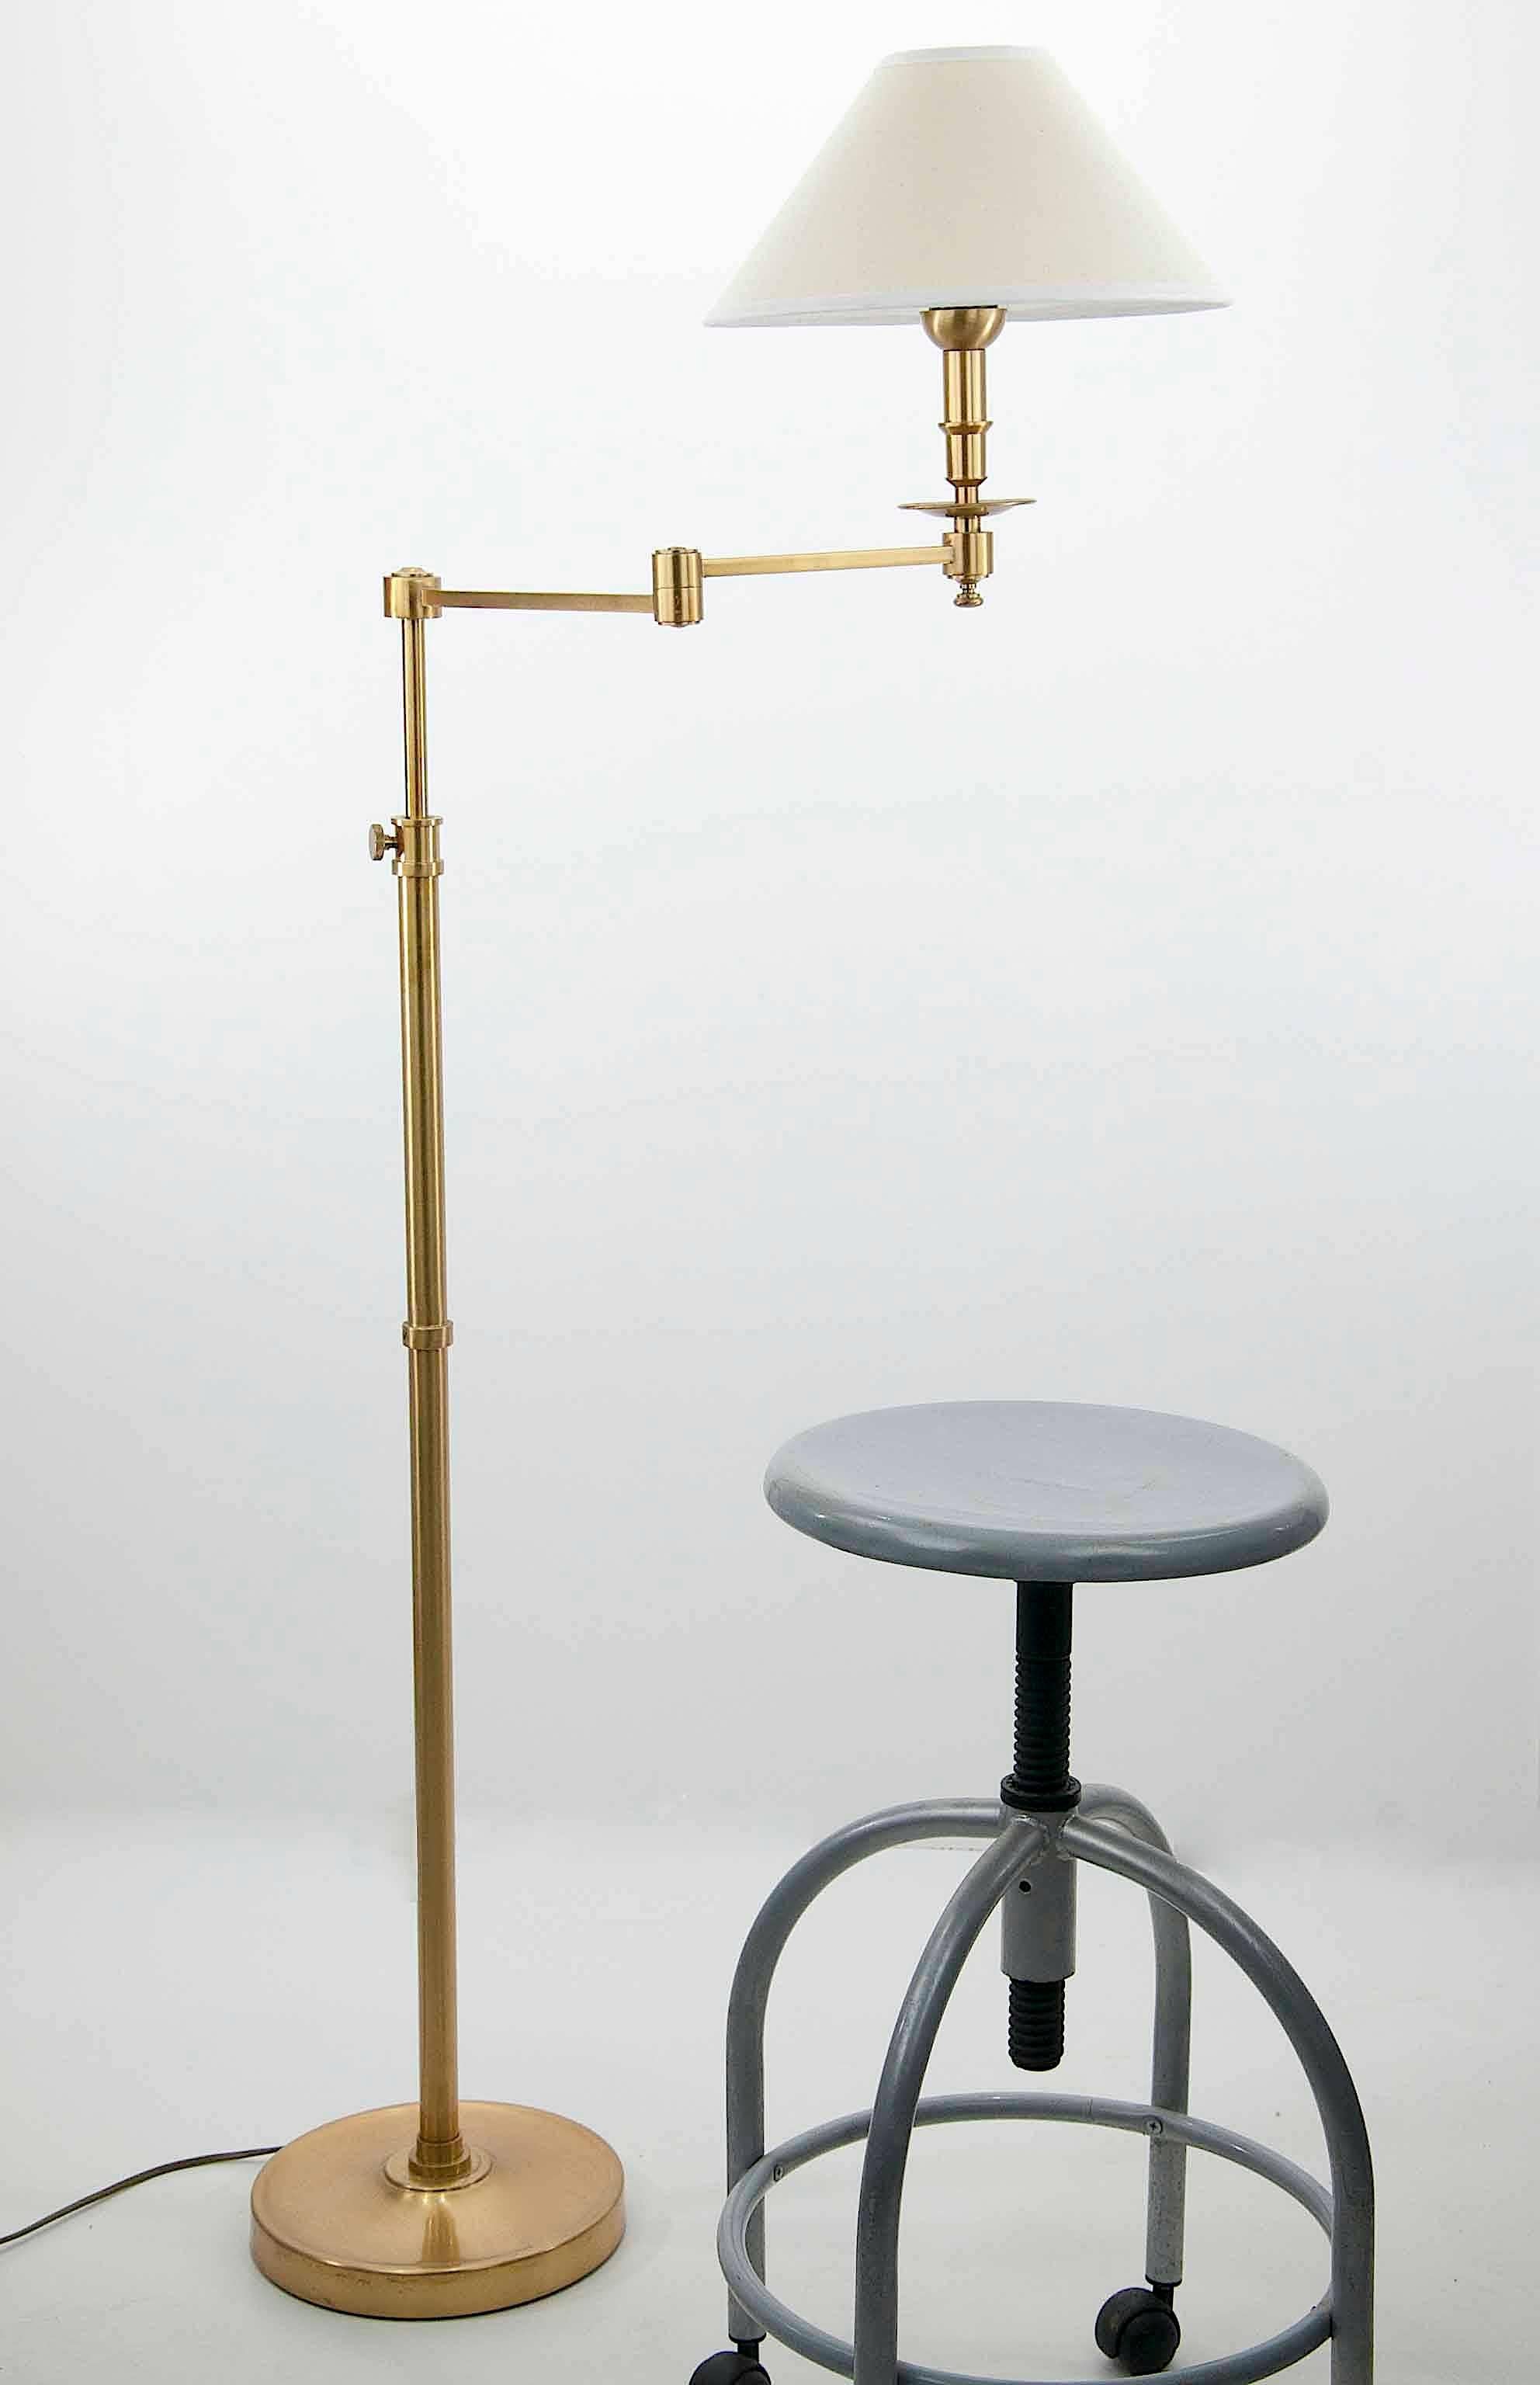 Polished brass, adjustable stem, wiring to US standard.
An US plug adaptateur can be furnished with the light. The light will requires a single Ediso, base bulb.
Measures: High 1 : 70,86 inches. High 2 : 55,11inches
Width maxi : 24.01 inches.